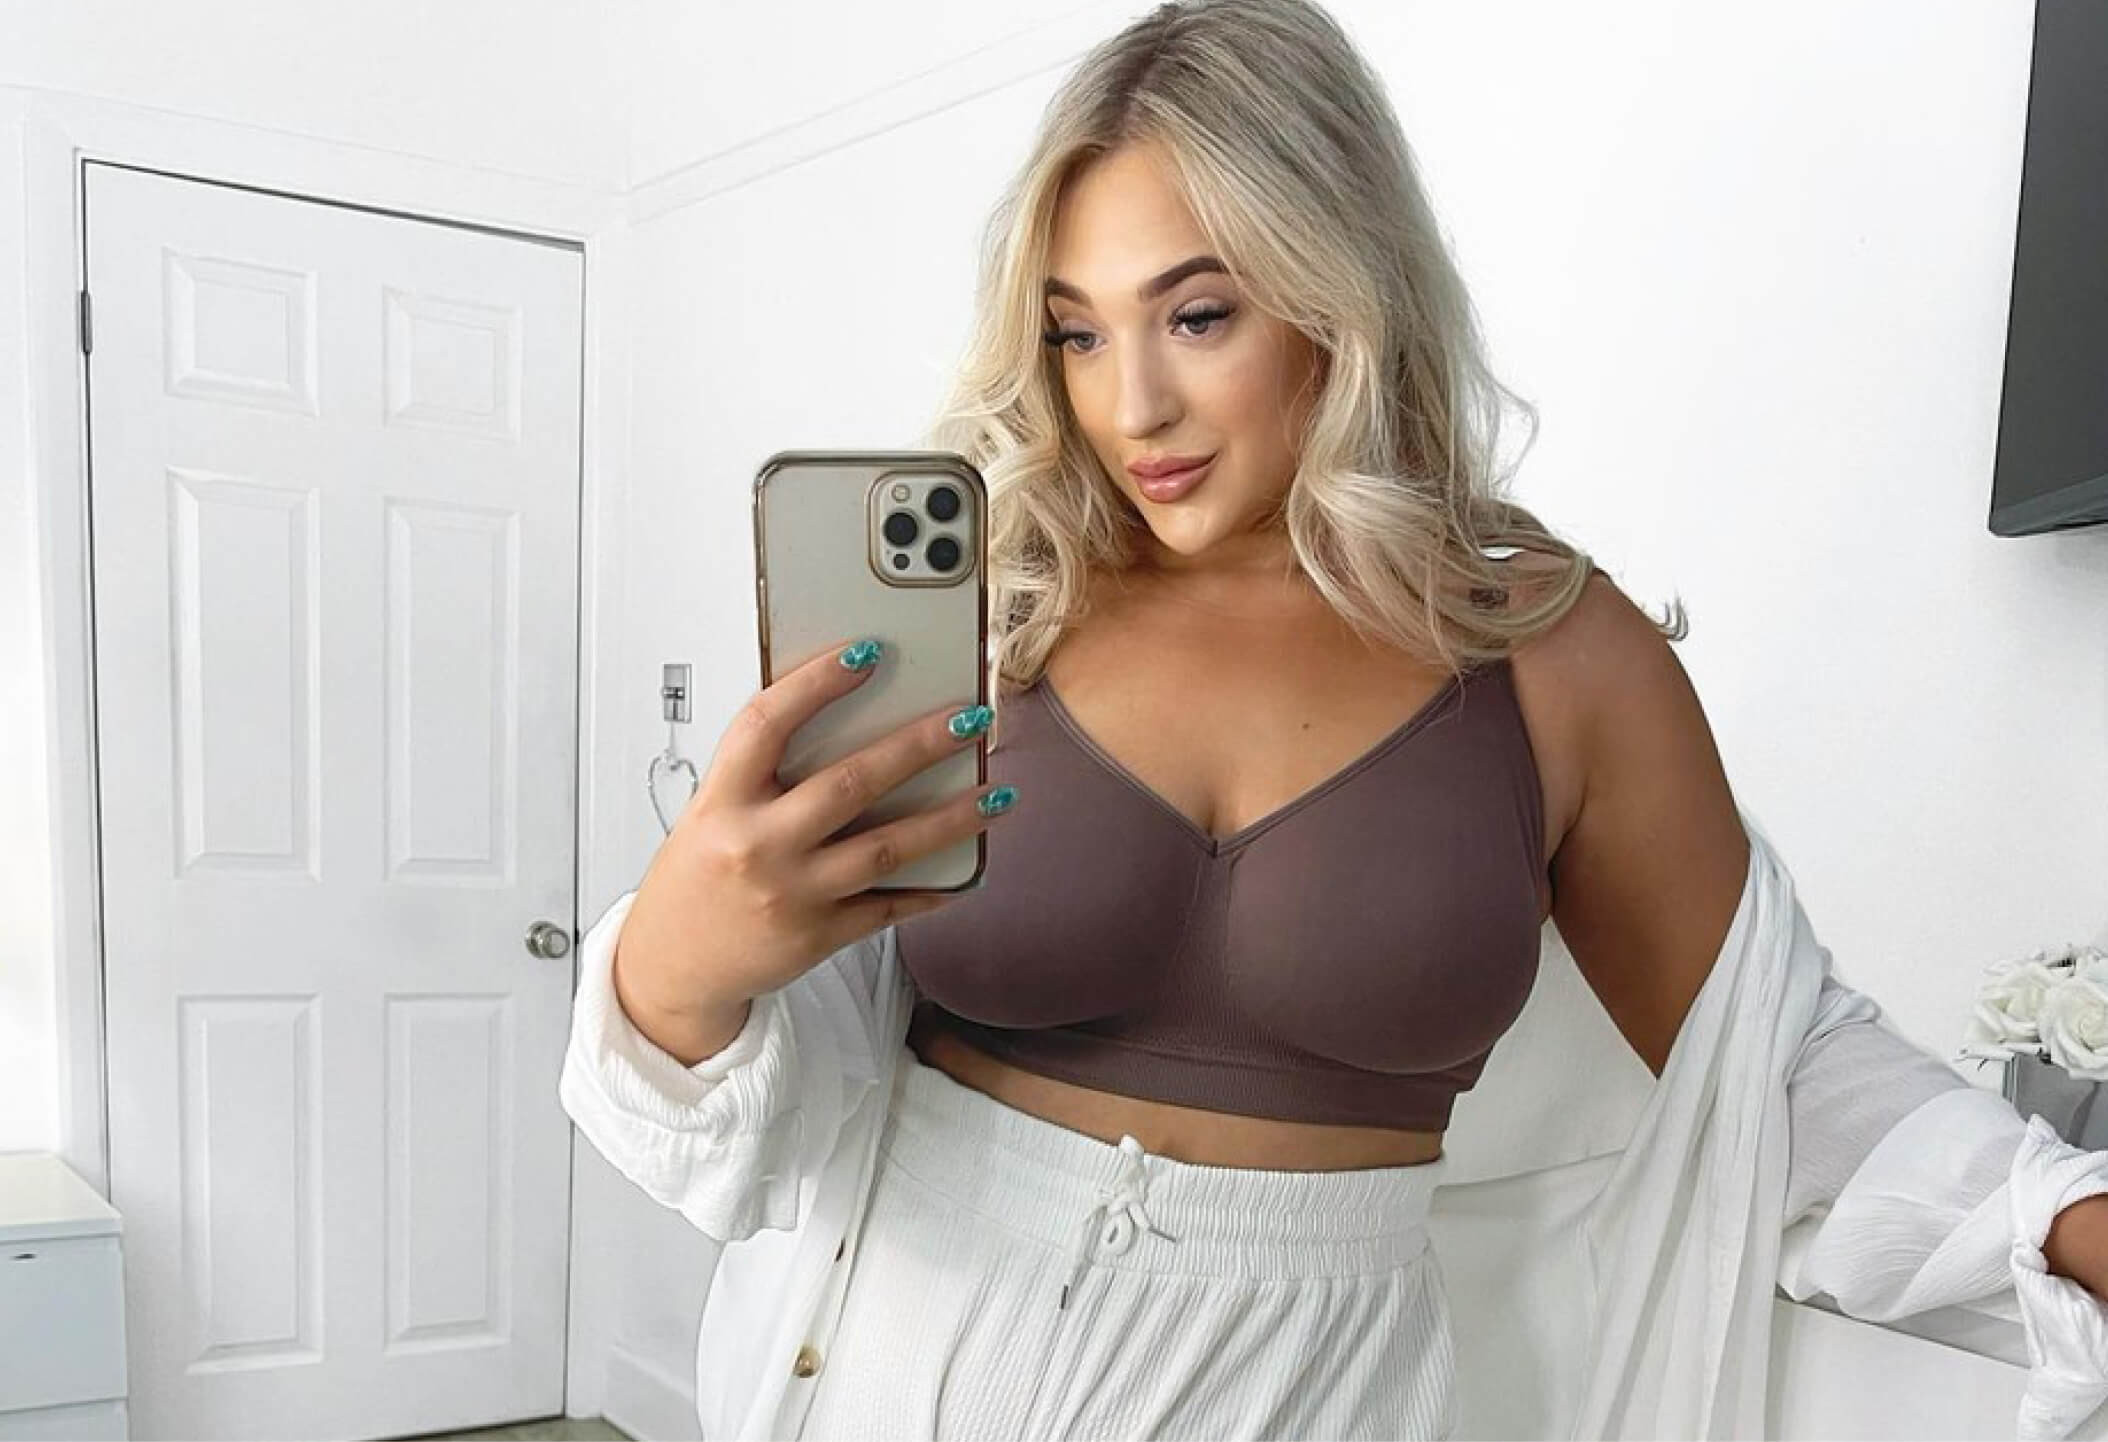 Big Boobs Fashion & Style Tips for Women with Large Breasts